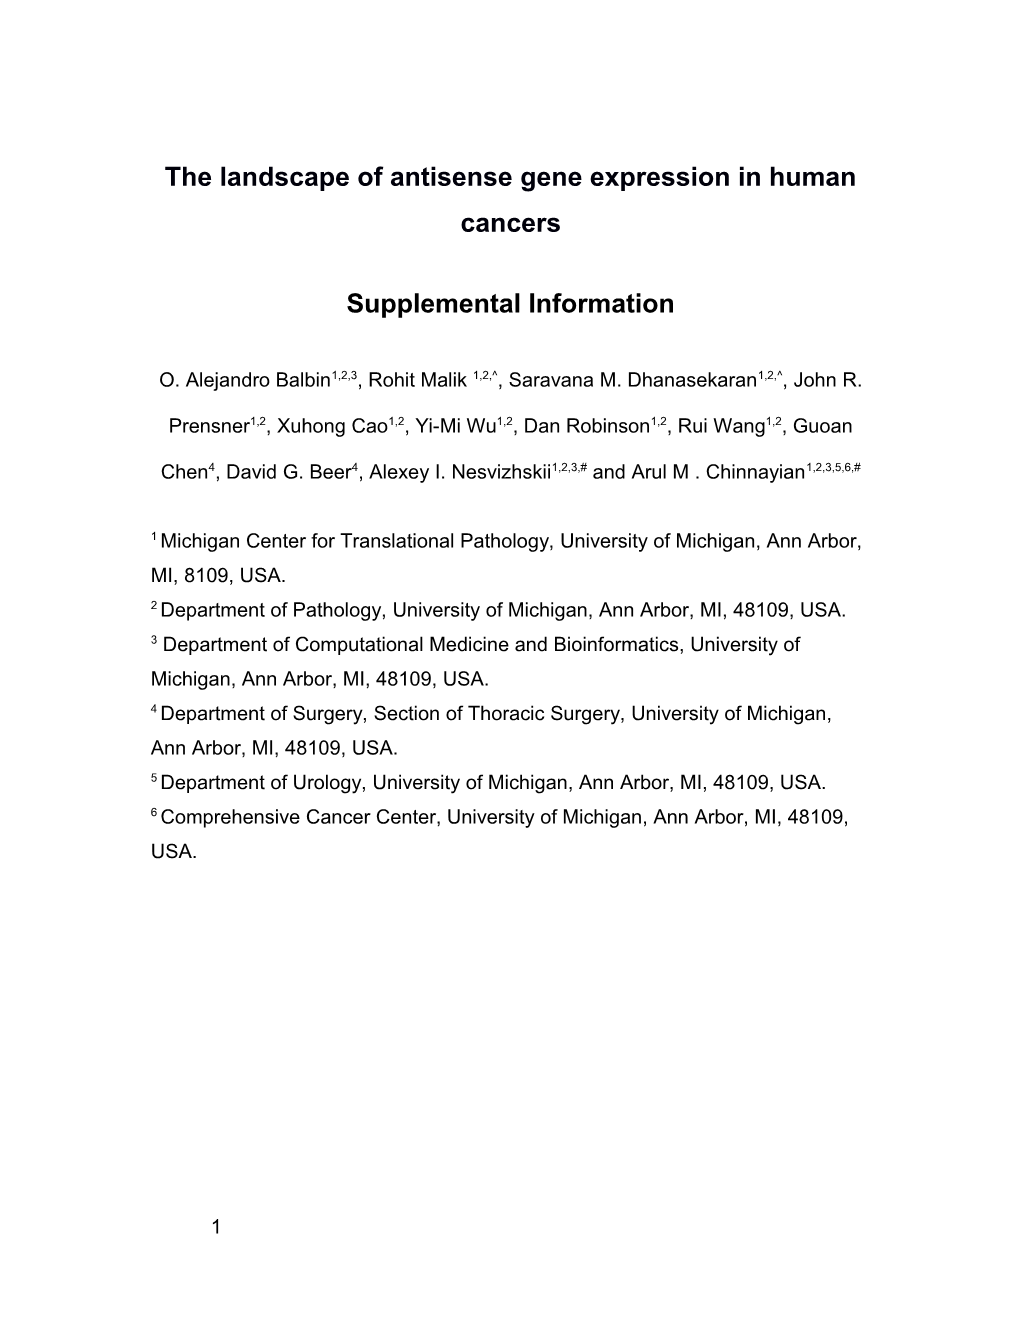 The Landscape of Antisense Gene Expression in Human Cancers